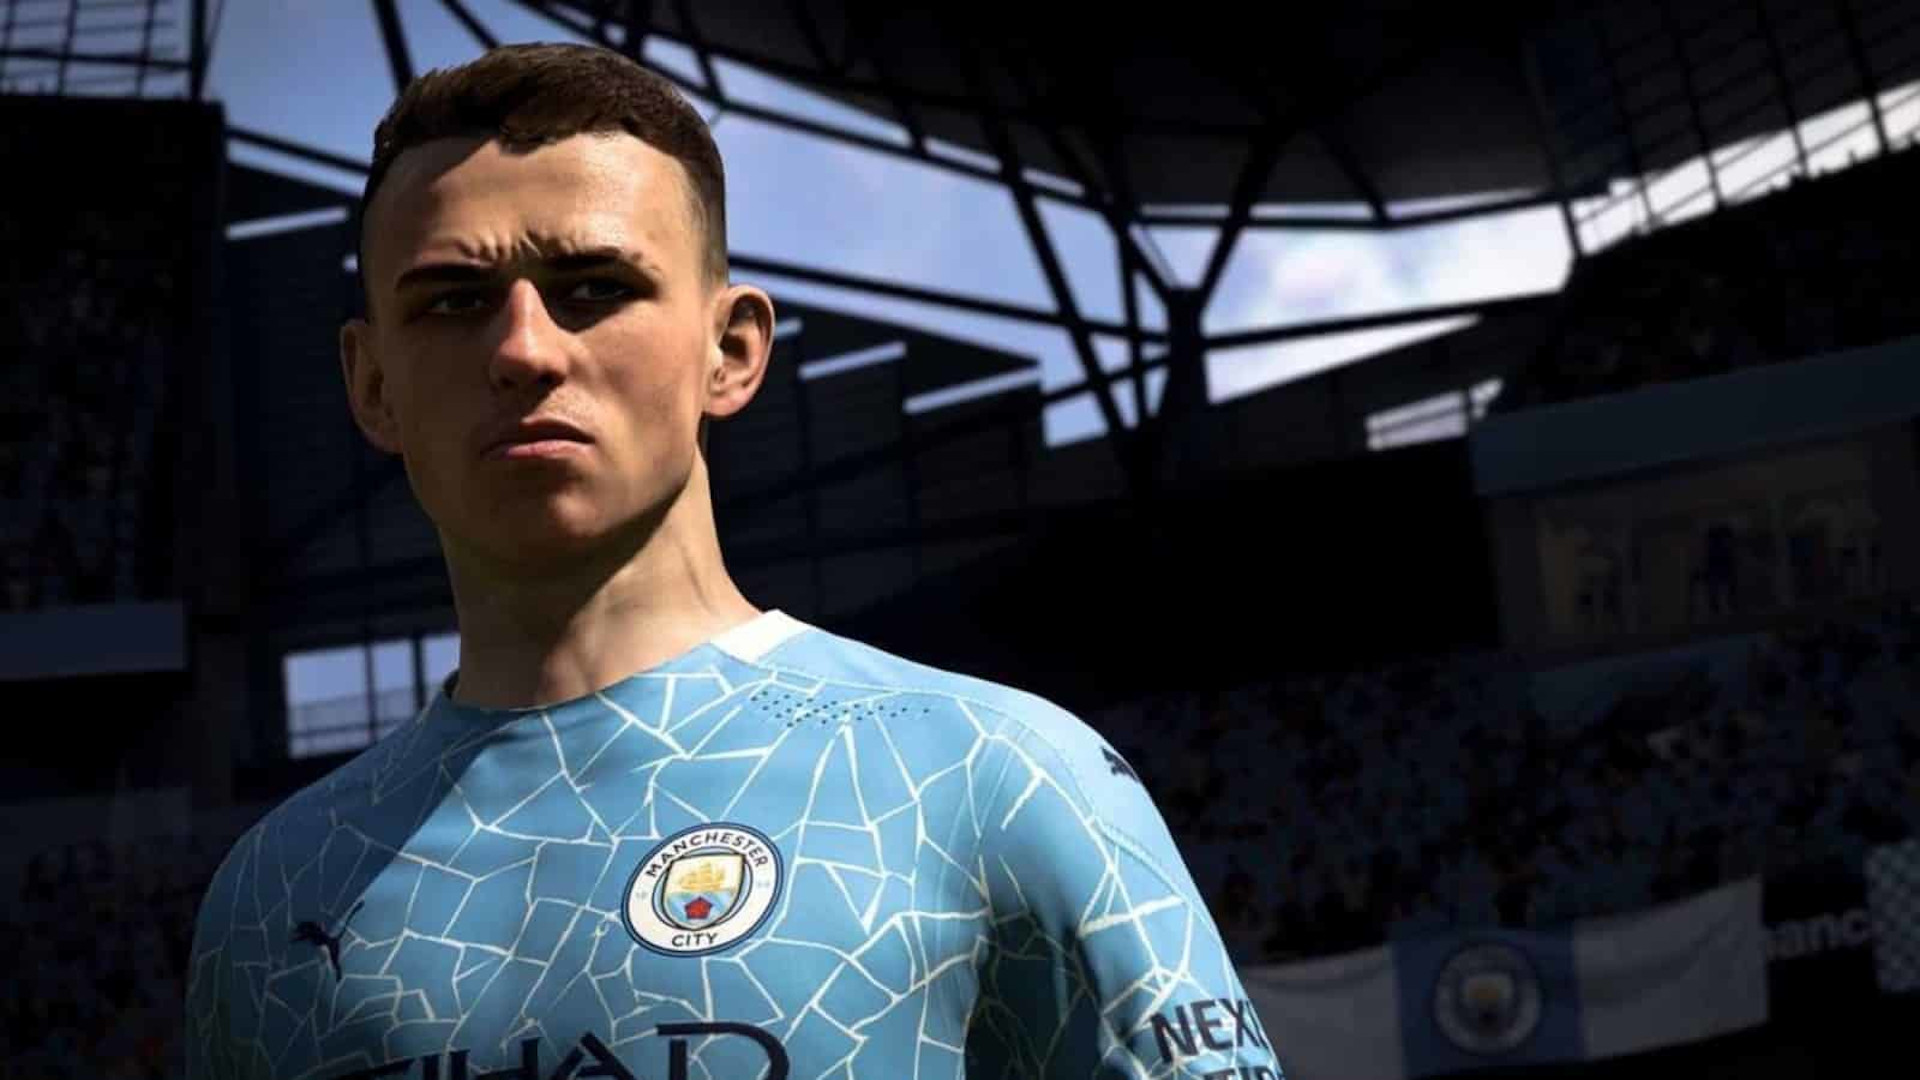 FIFA 22's Preview Packs Are A Farcical Half Measure To Curb Loot